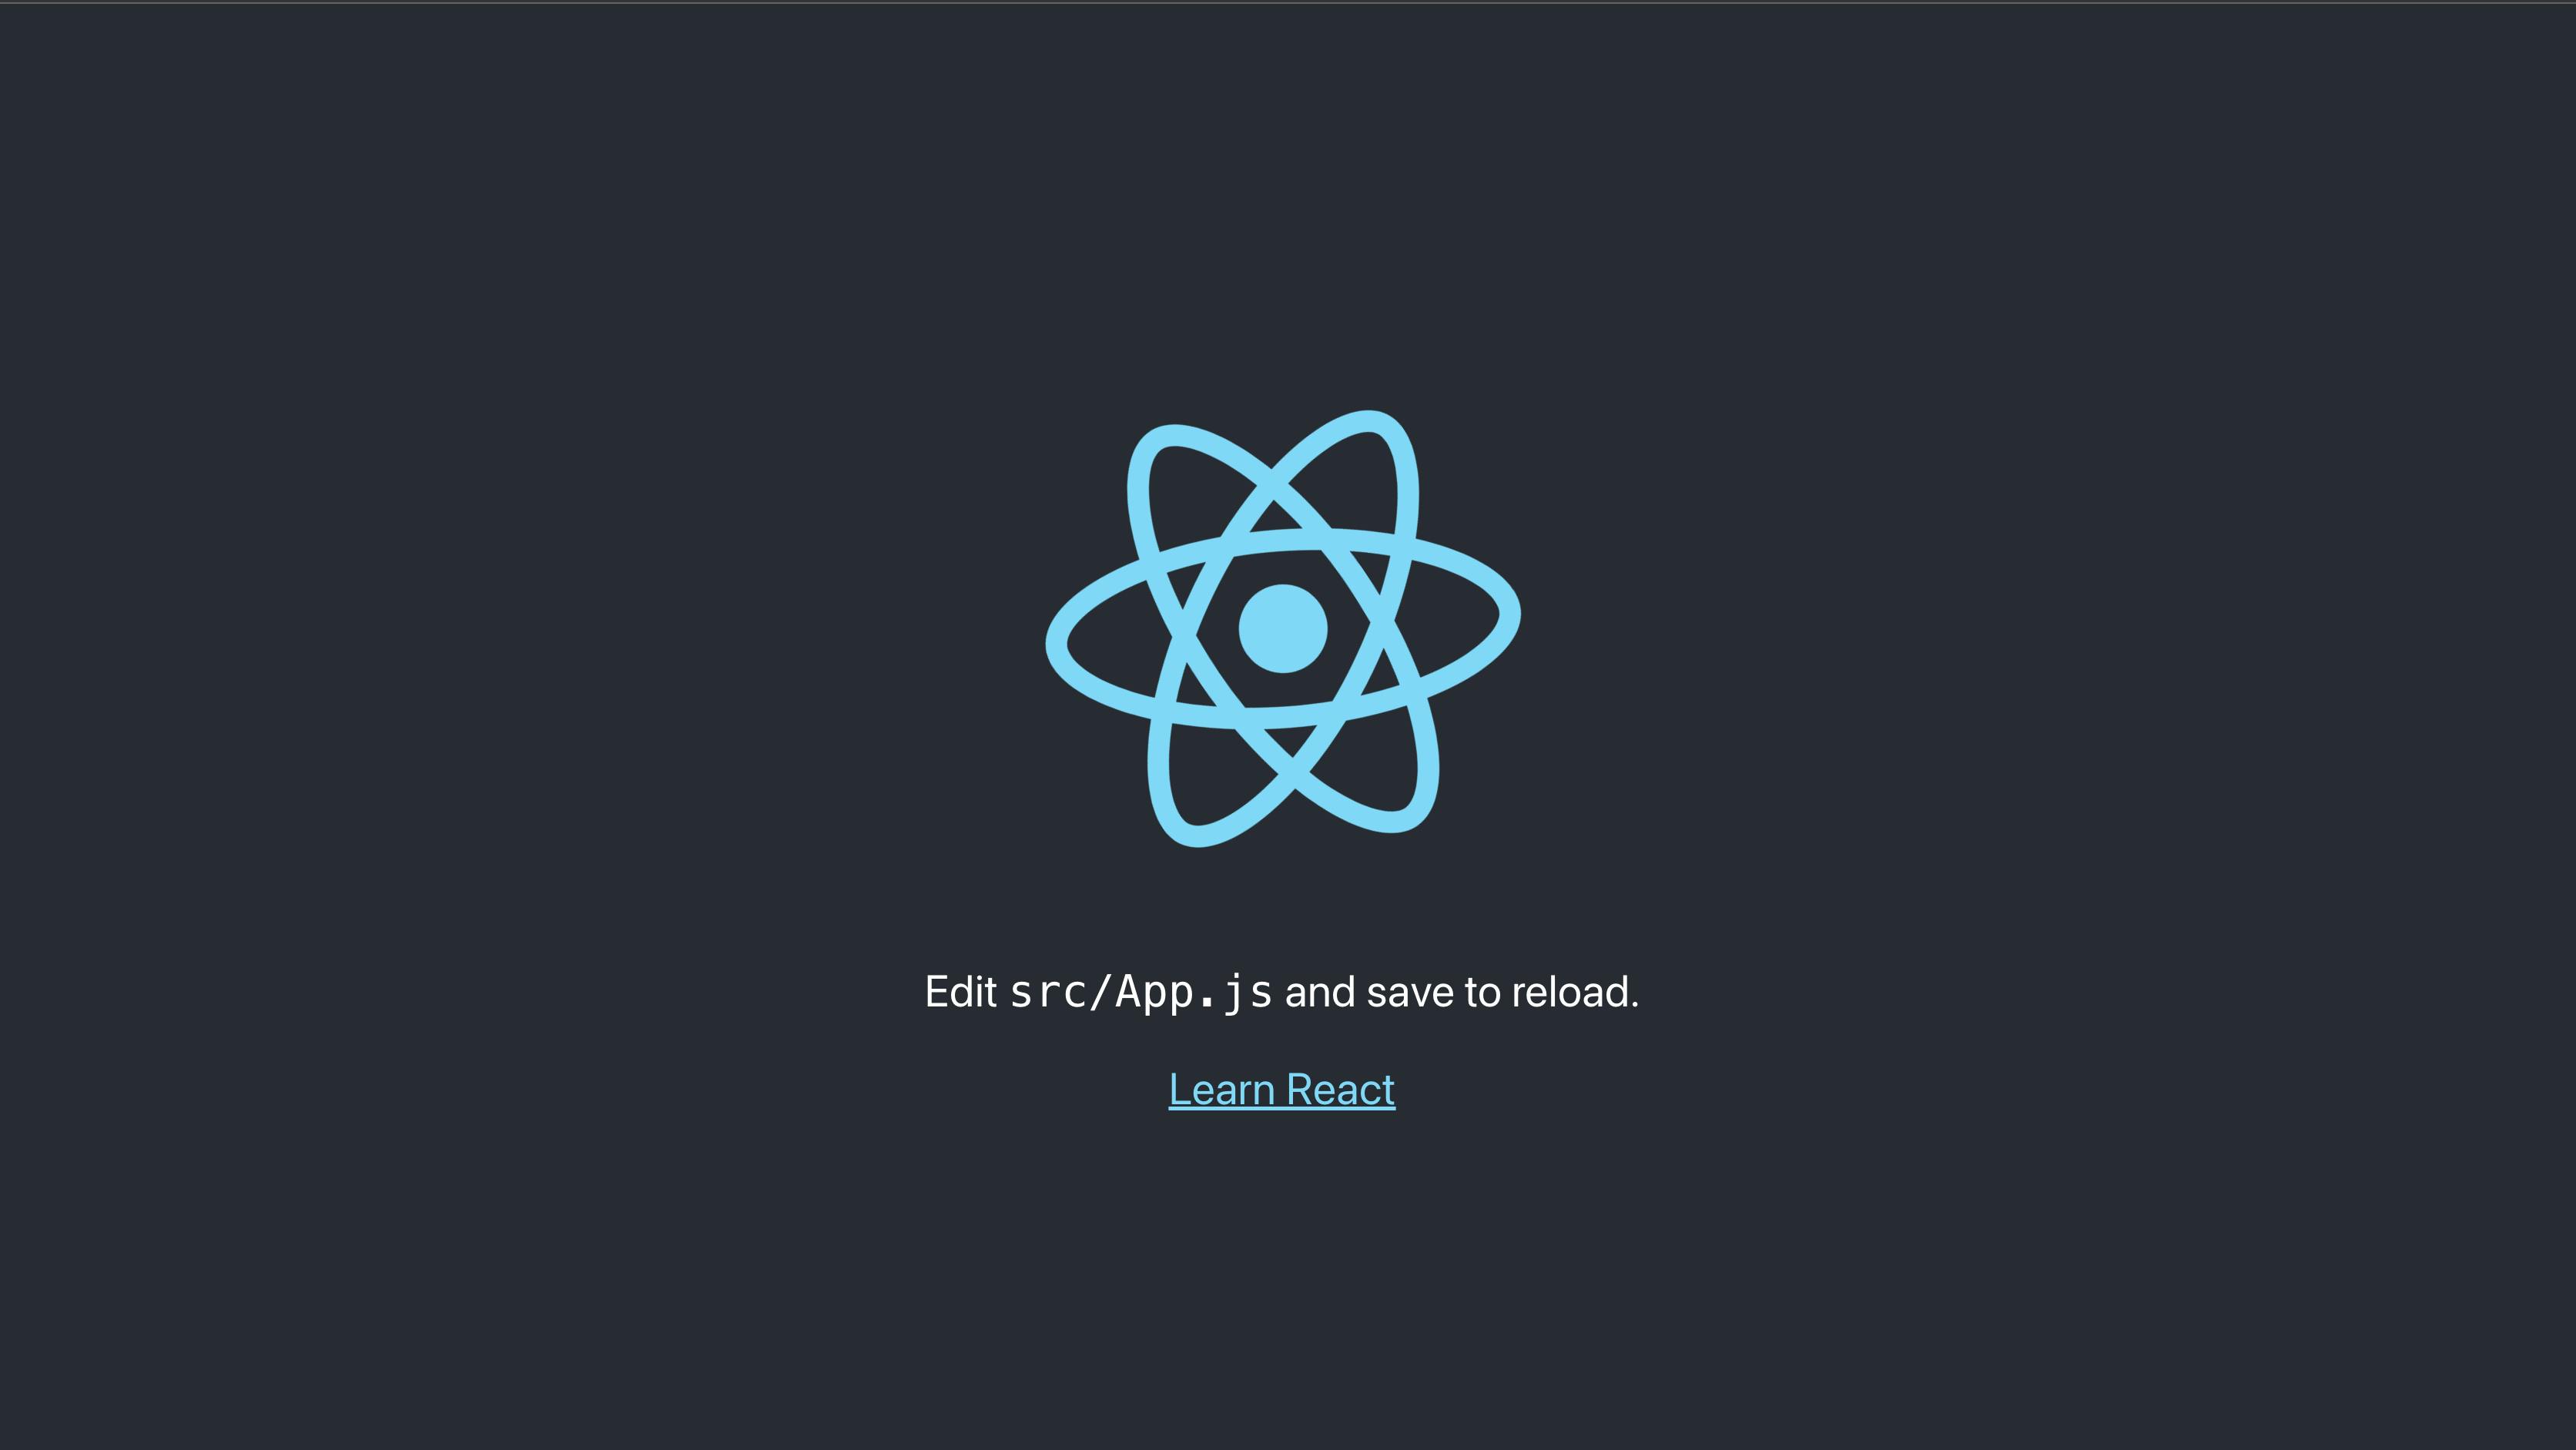 Initializing a React application - How to Build and Push Projects to a Web3 / Decentralized Git Hosting Protocol: Radicle